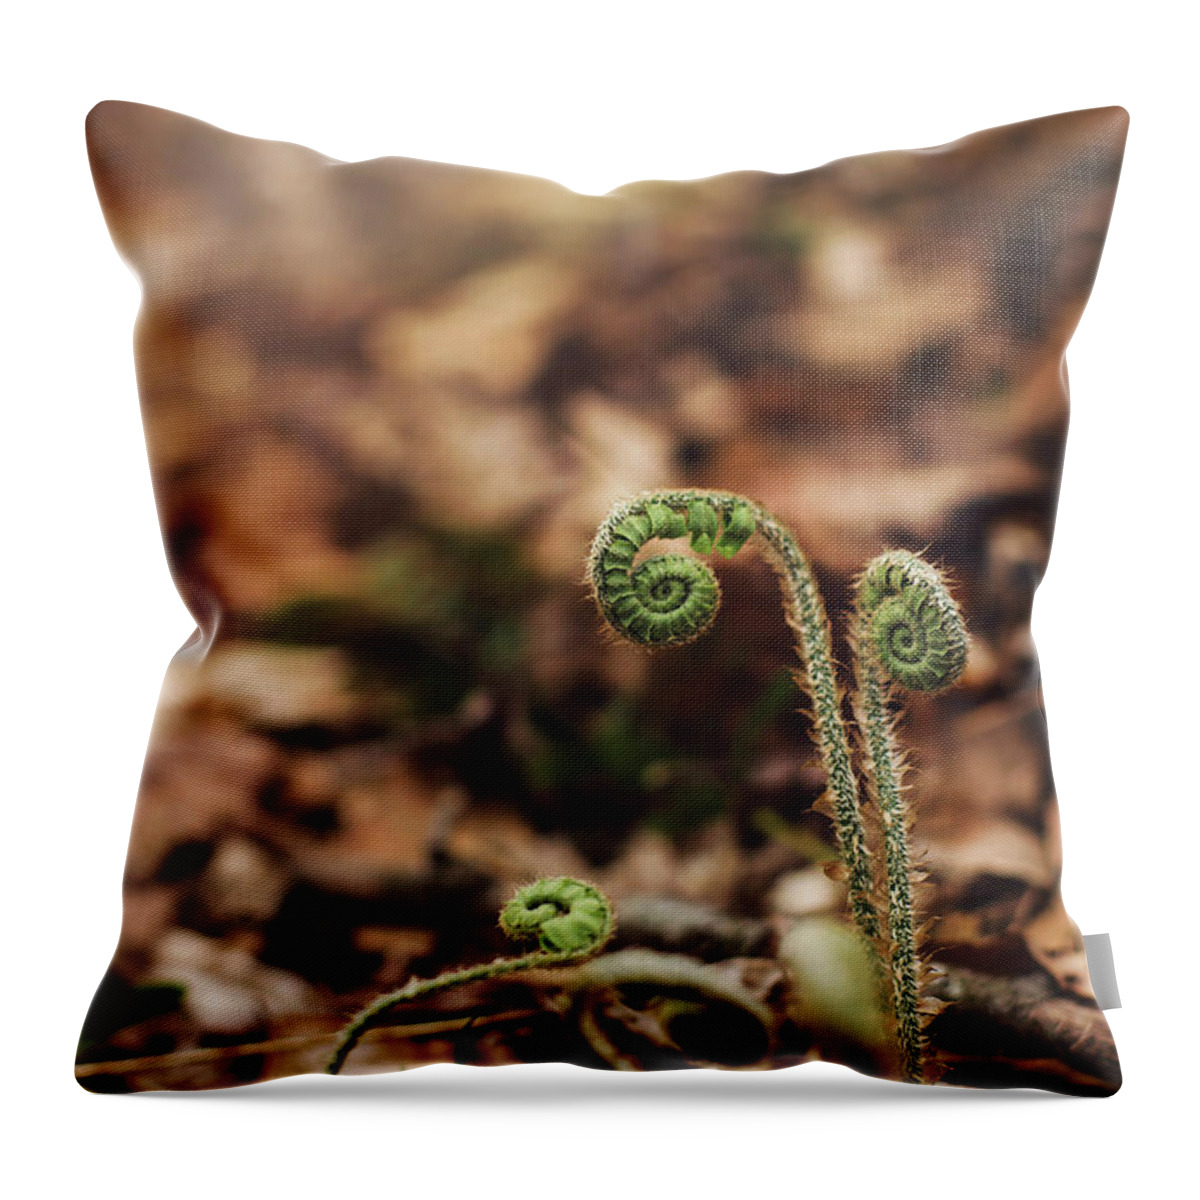 Fern Throw Pillow featuring the photograph Coiled Fern Among Leaves on Forest Floor by Amber Flowers